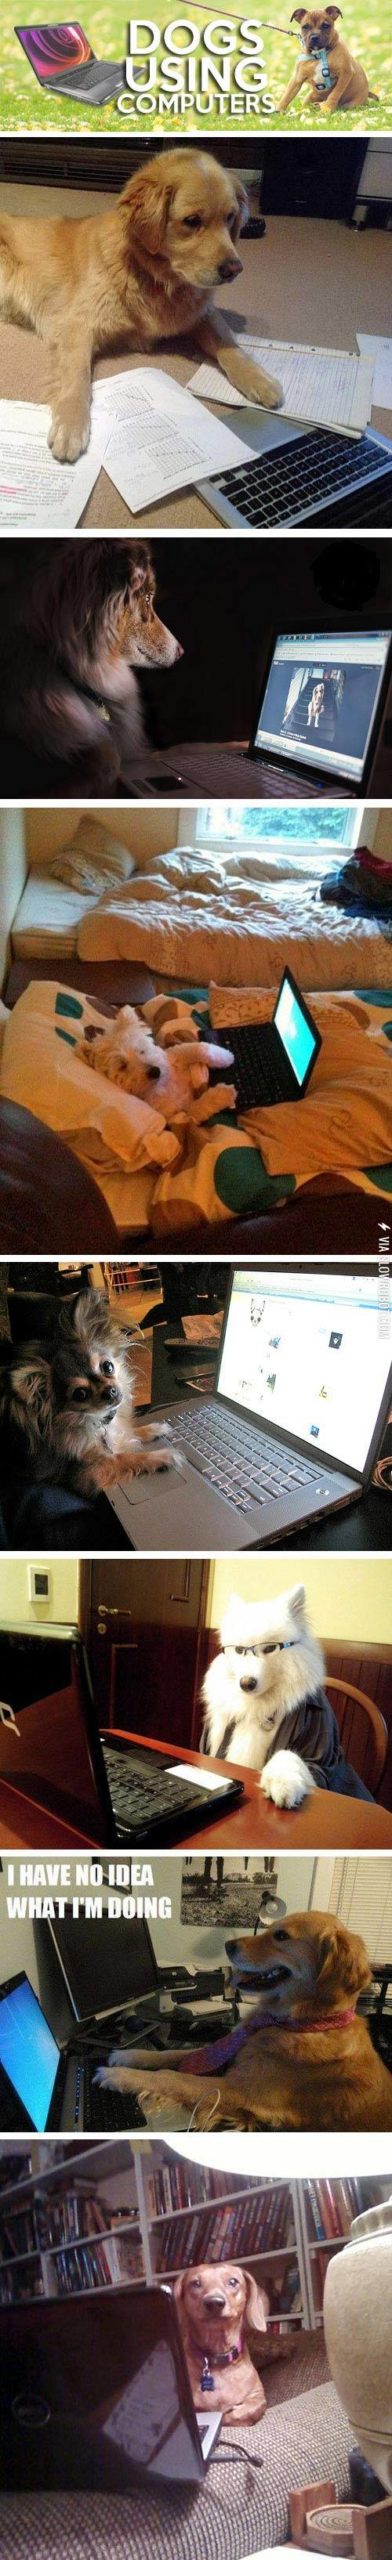 Dogs+using+computers